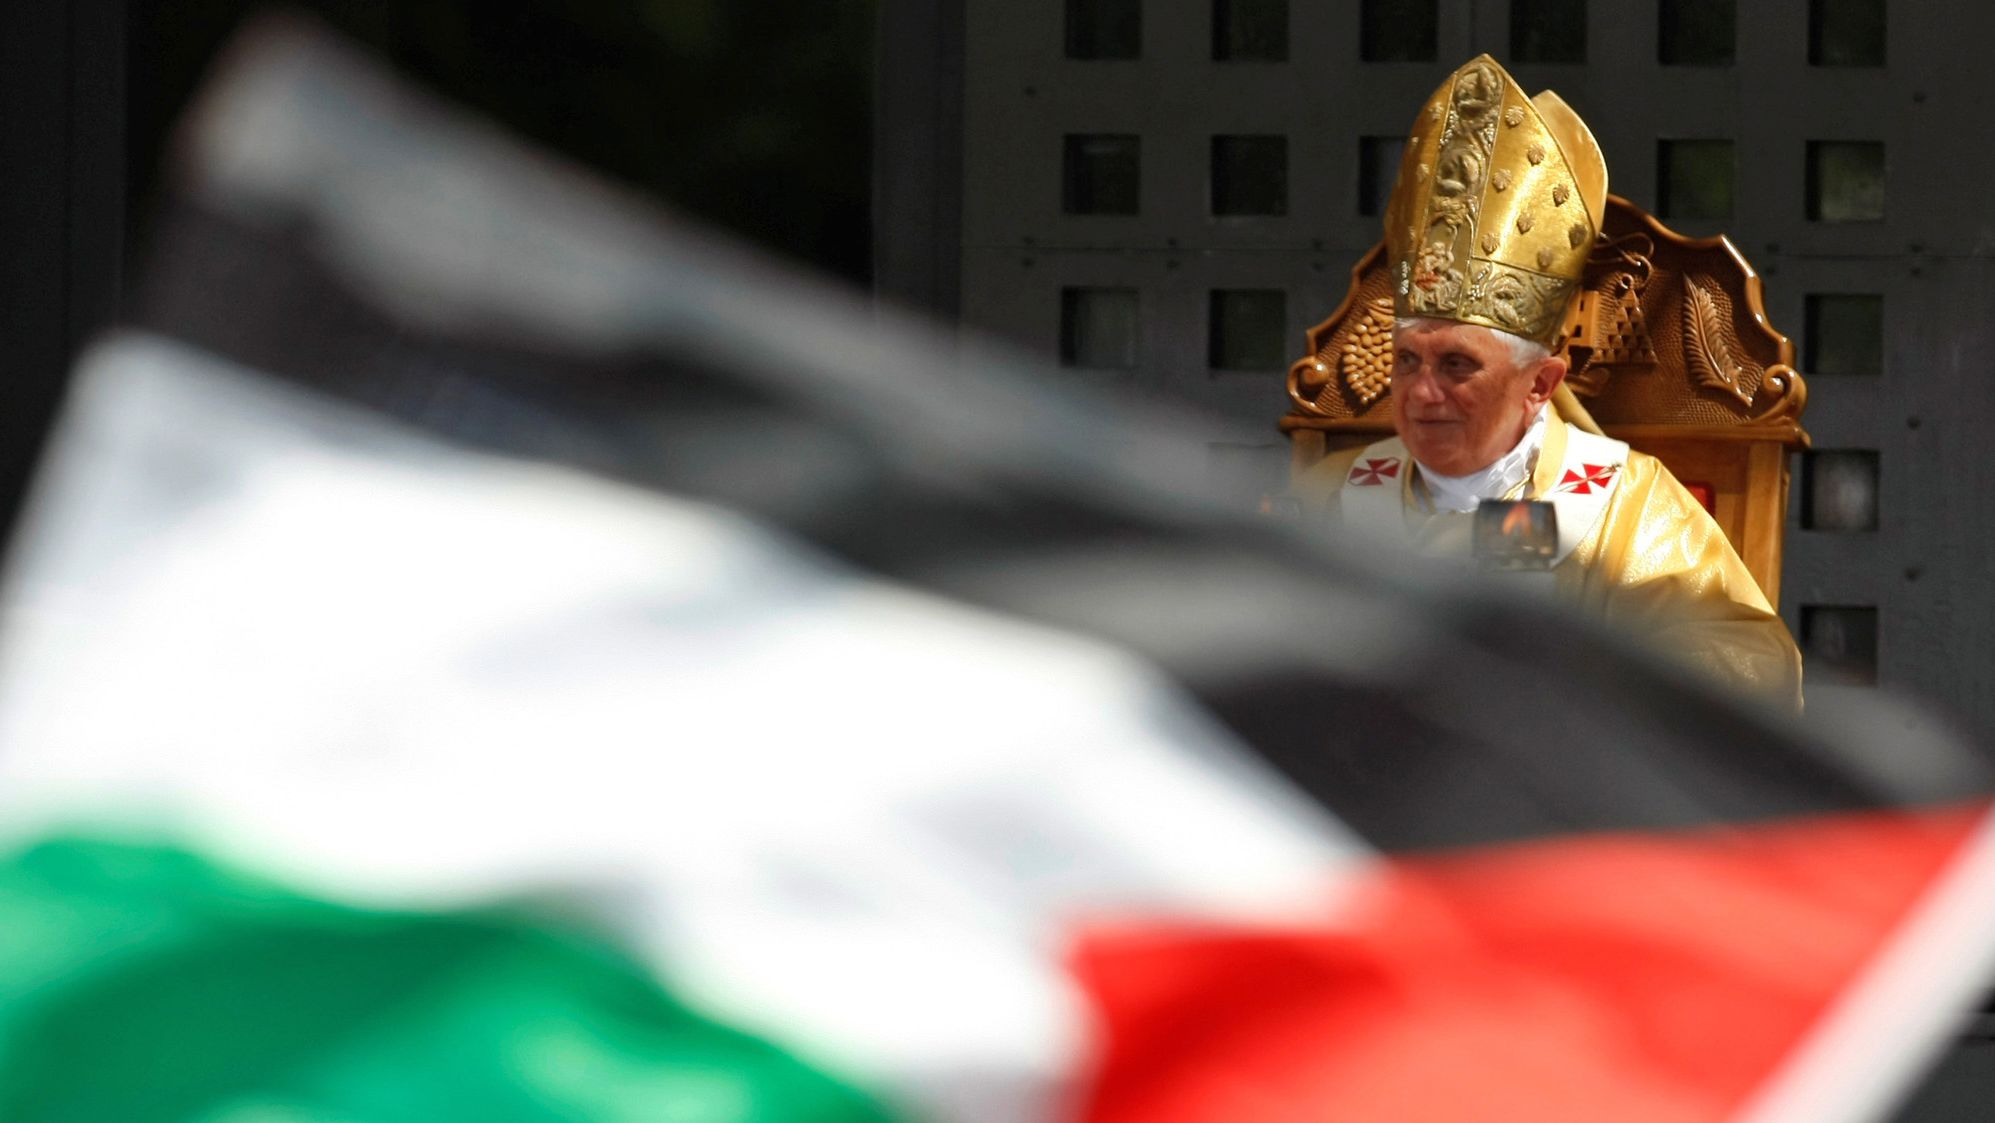 The Pope leads a mass in Manger Square, next to the Church of the Nativity, as a Palestinian flag is waved the West Bank town of Bethlehem in May 2009.